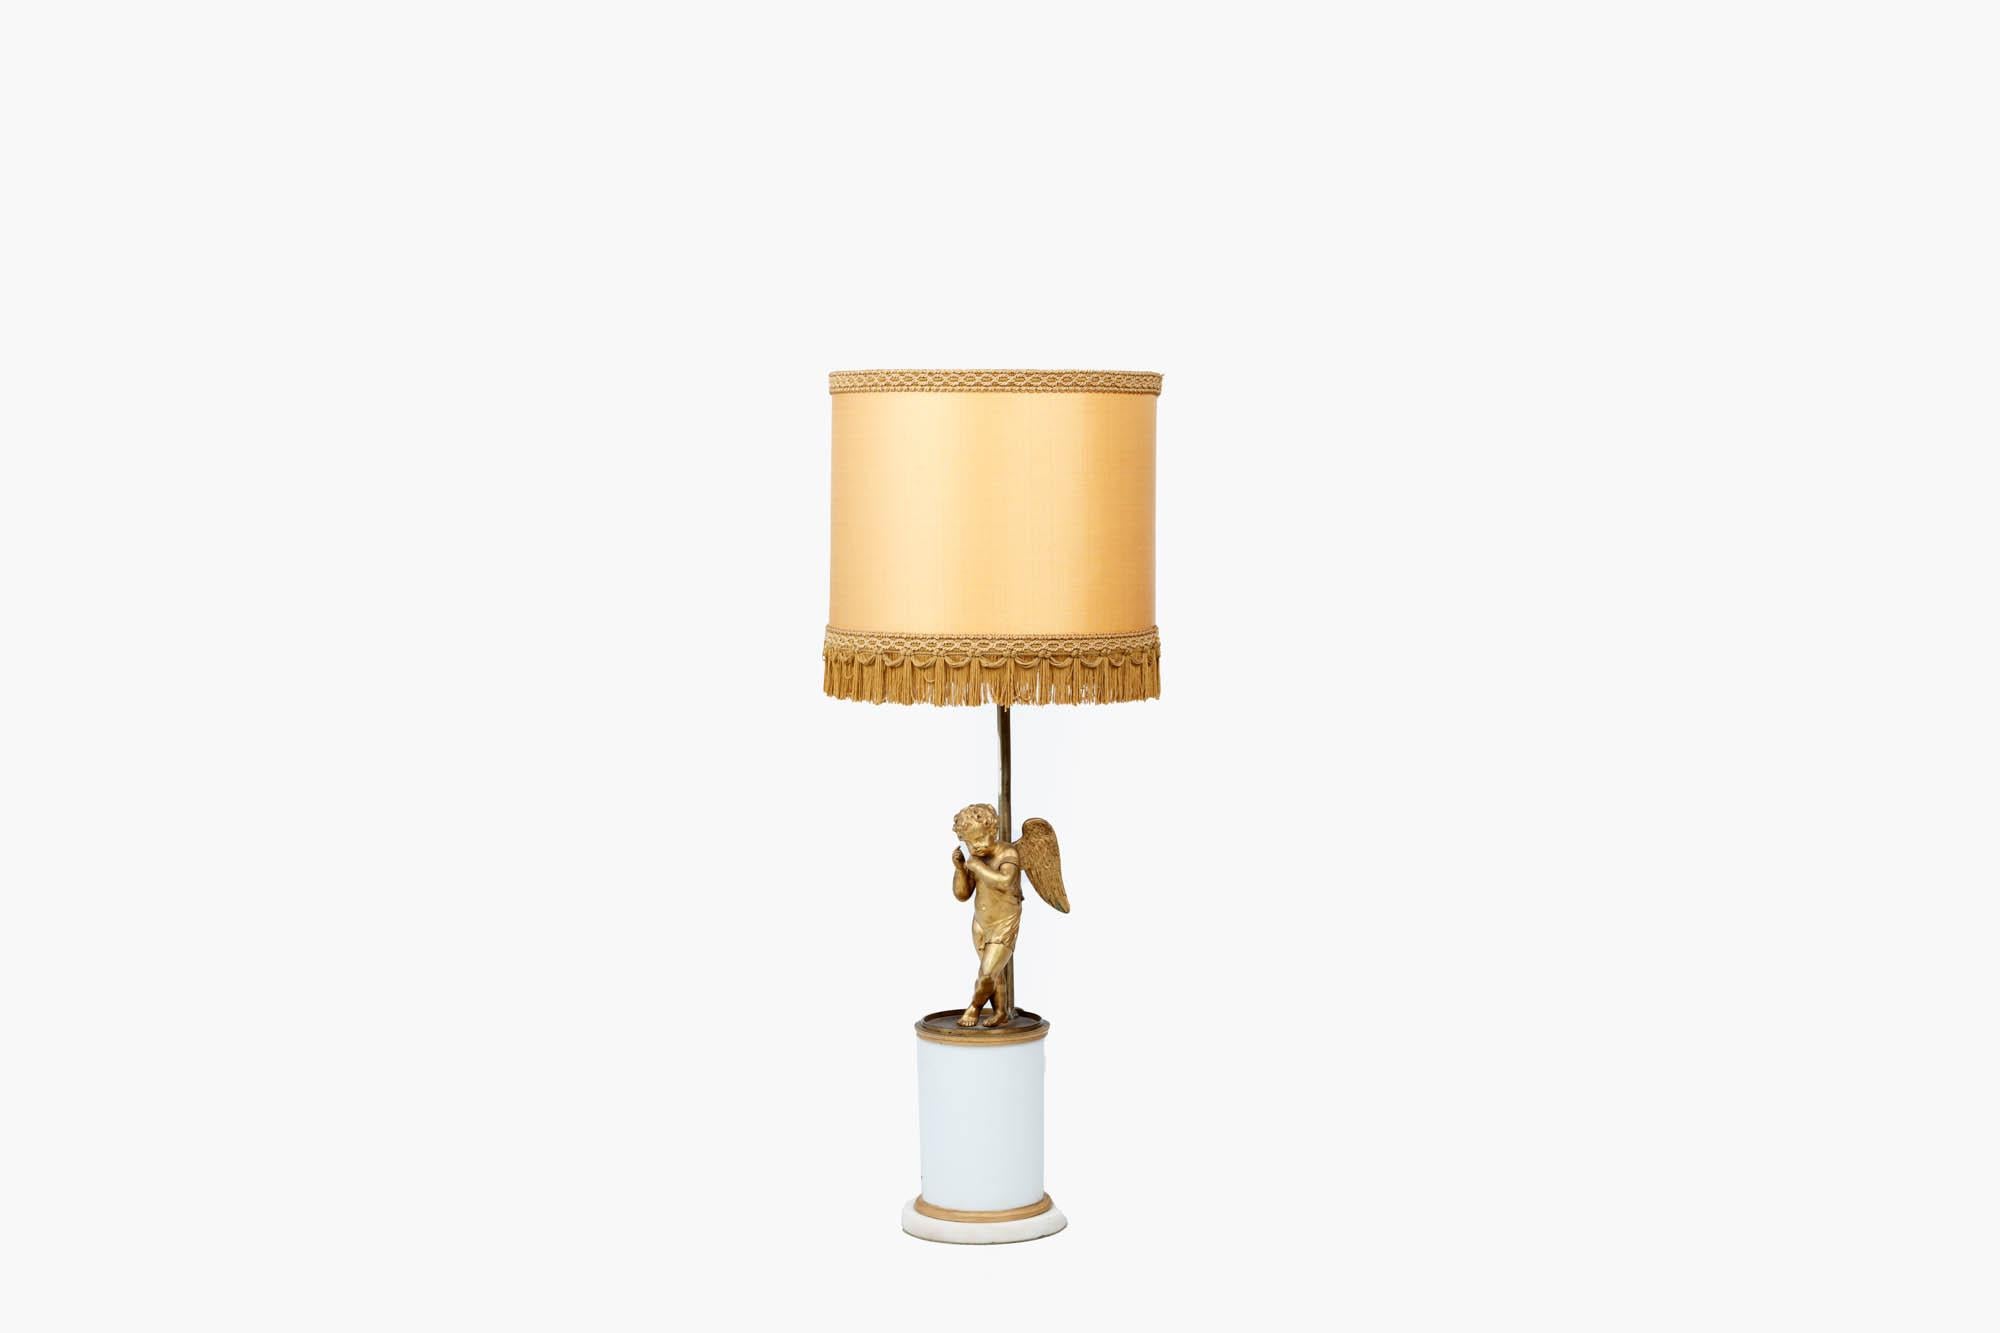 Early 20th century table lamp in the Neoclassical style with winged cherub figure sitting above a heavy white cylindrical column base complete with gilt banding to the top and base.